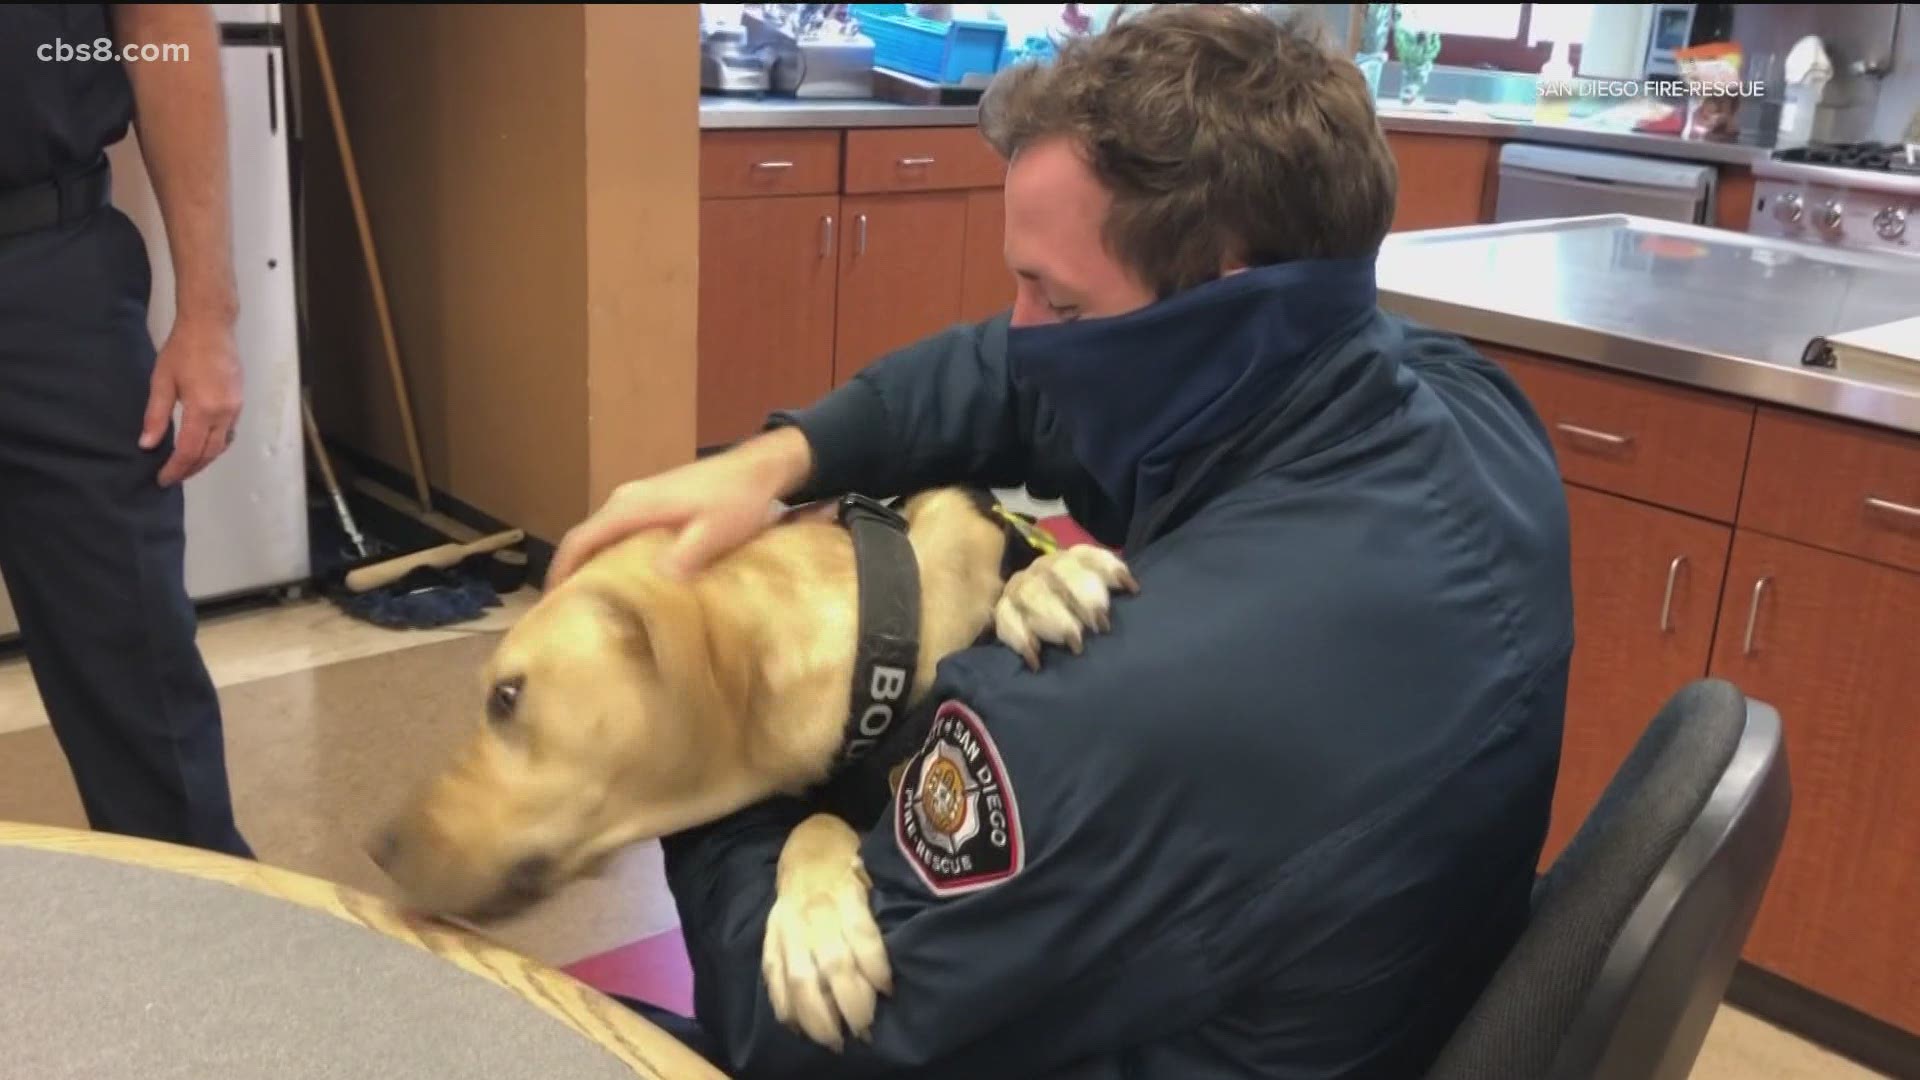 Meet the newest four-legged firefighters bringing comfort to those who need it most.